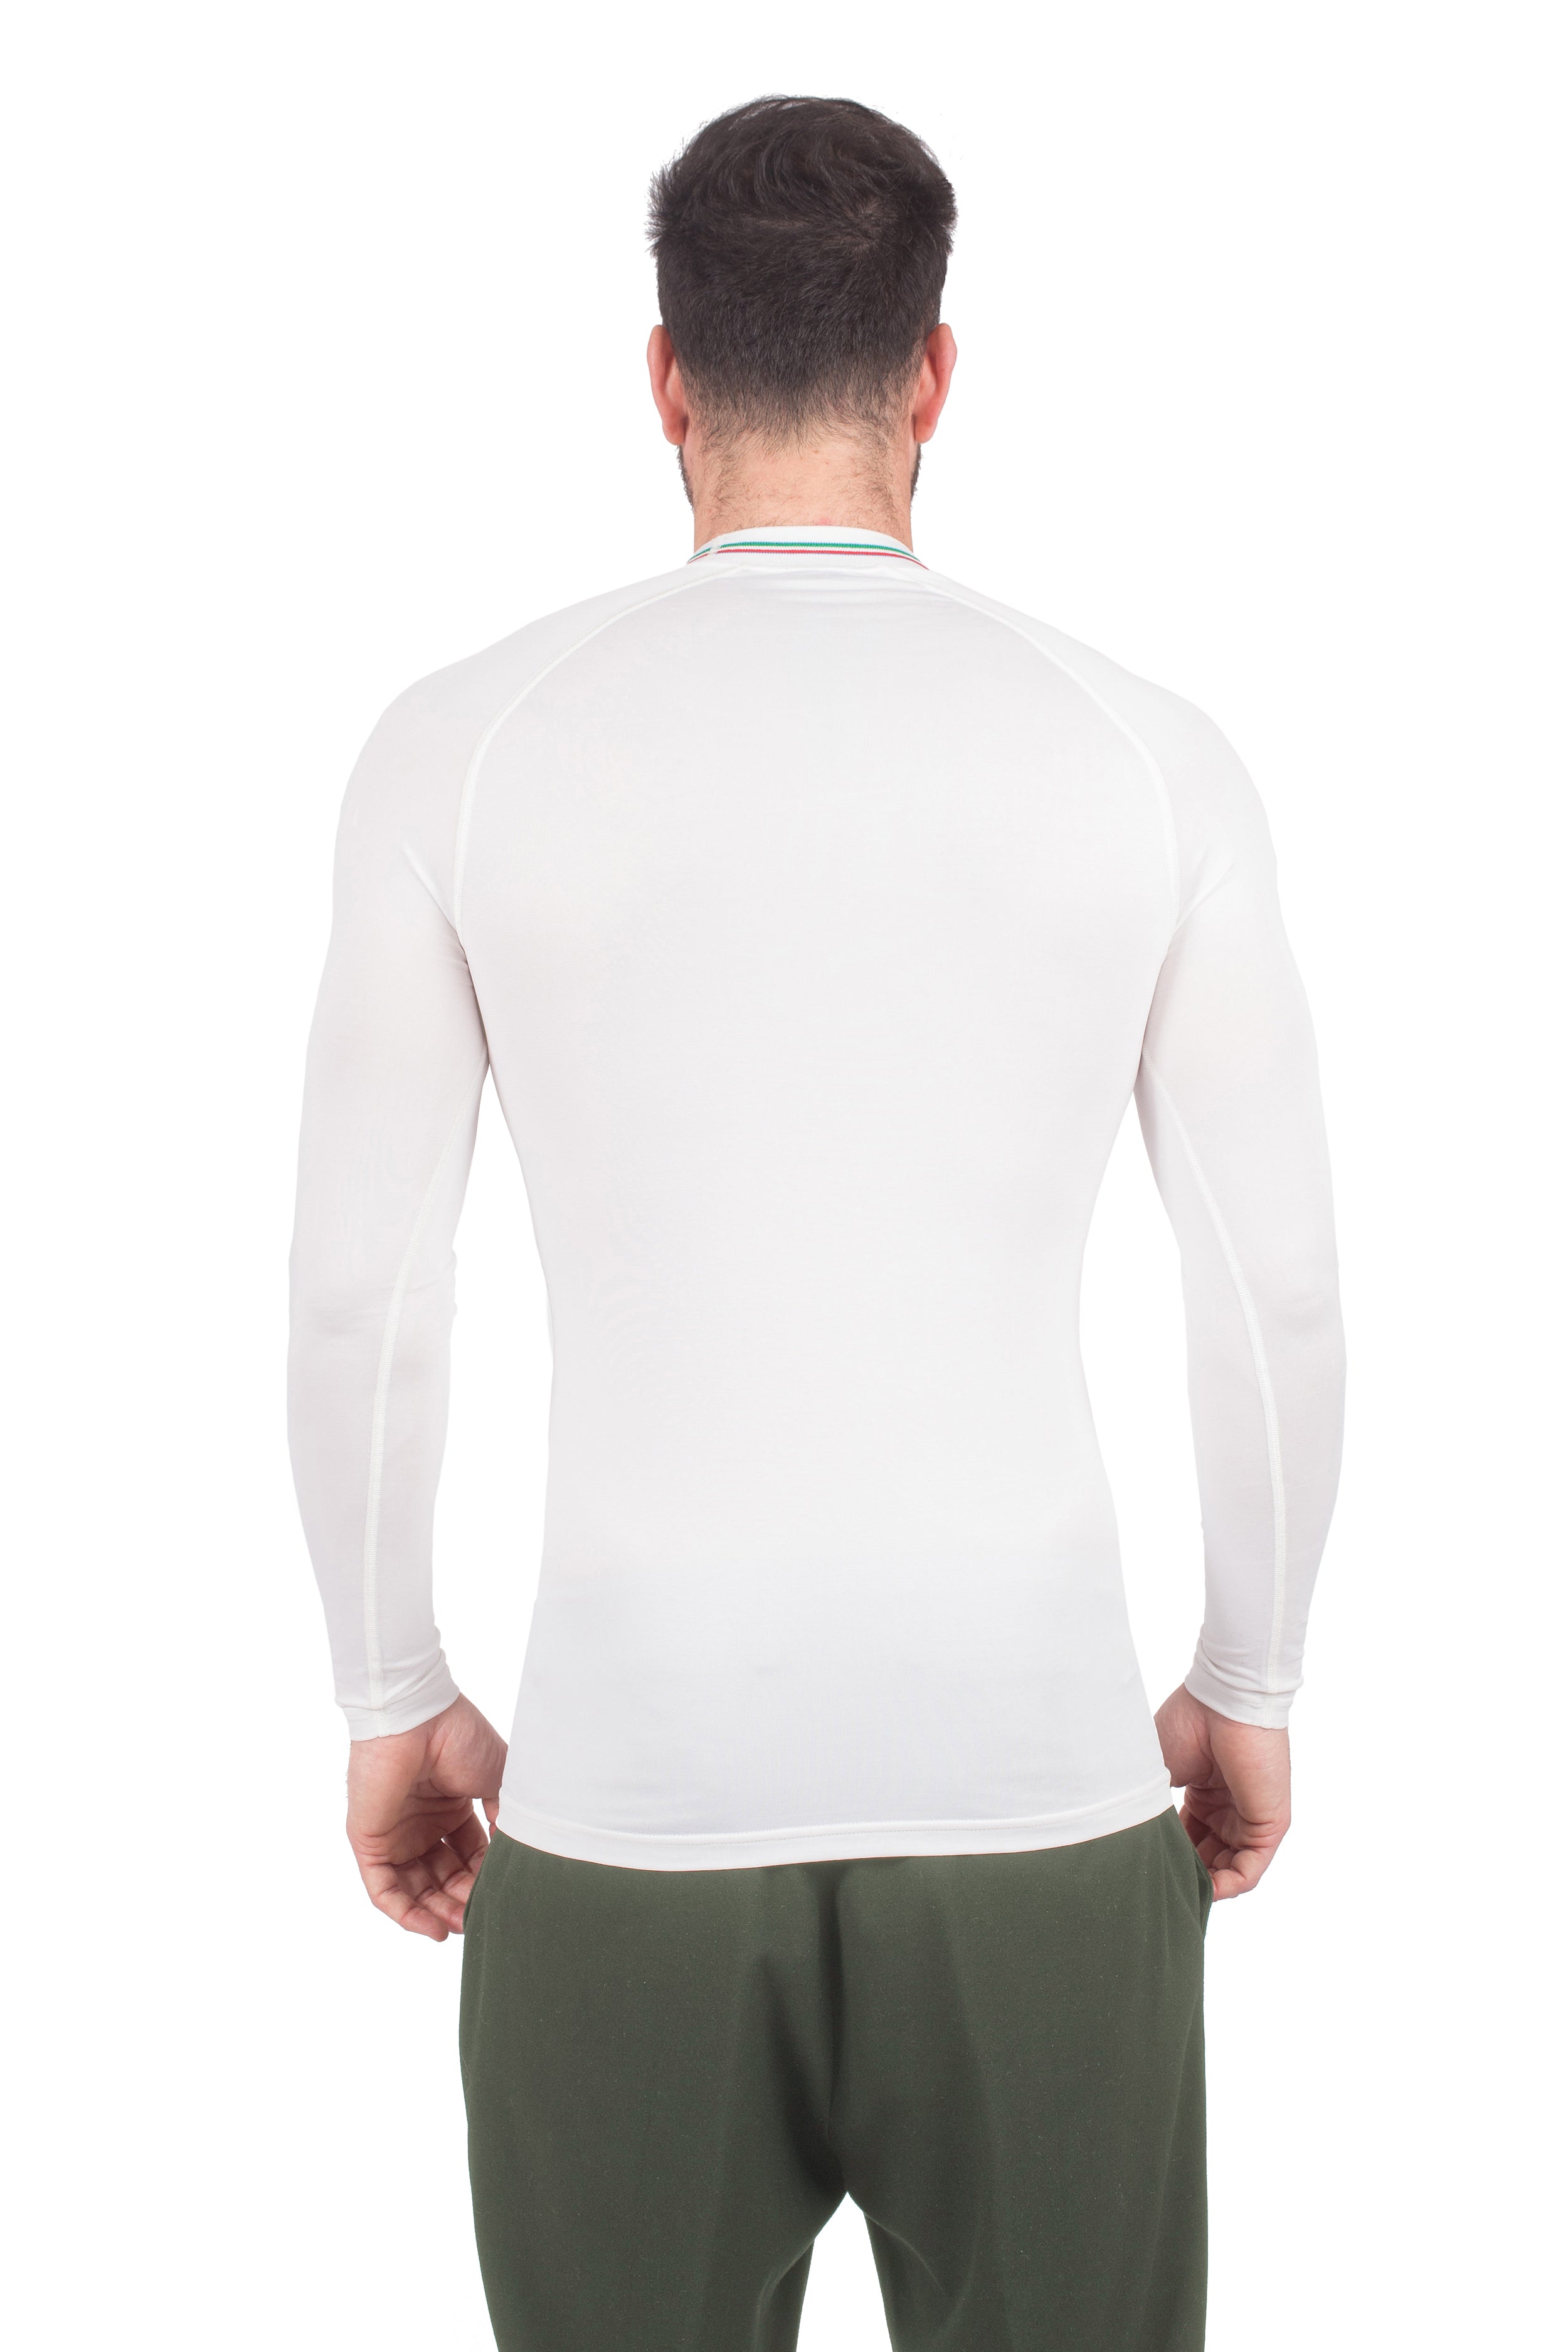 Italian Air Force FIREPROOF THERMAL SHIRT white